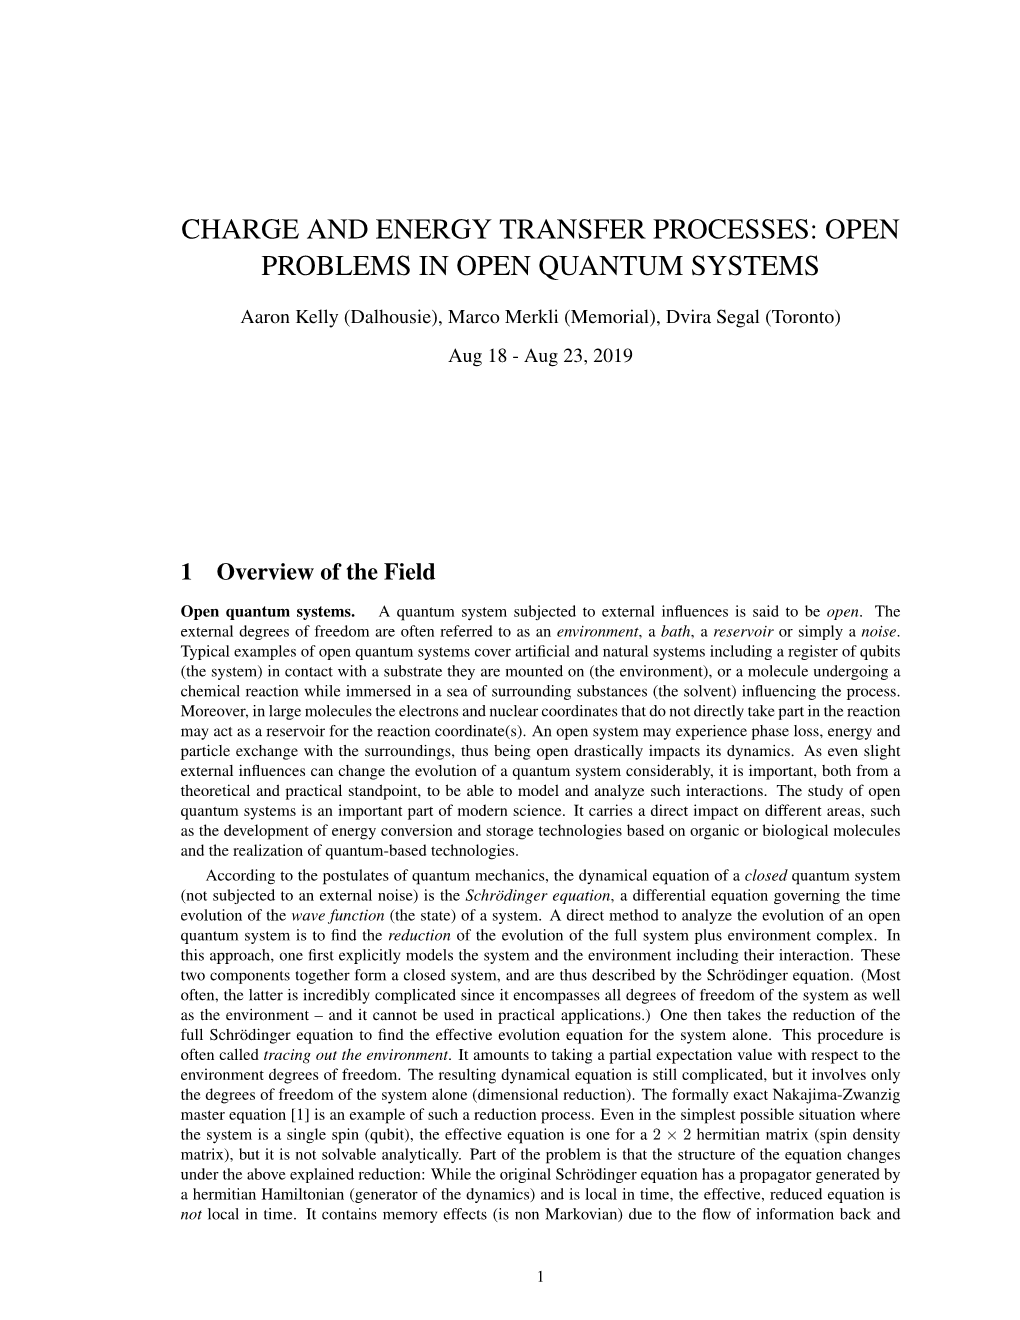 Charge and Energy Transfer Processes: Open Problems in Open Quantum Systems